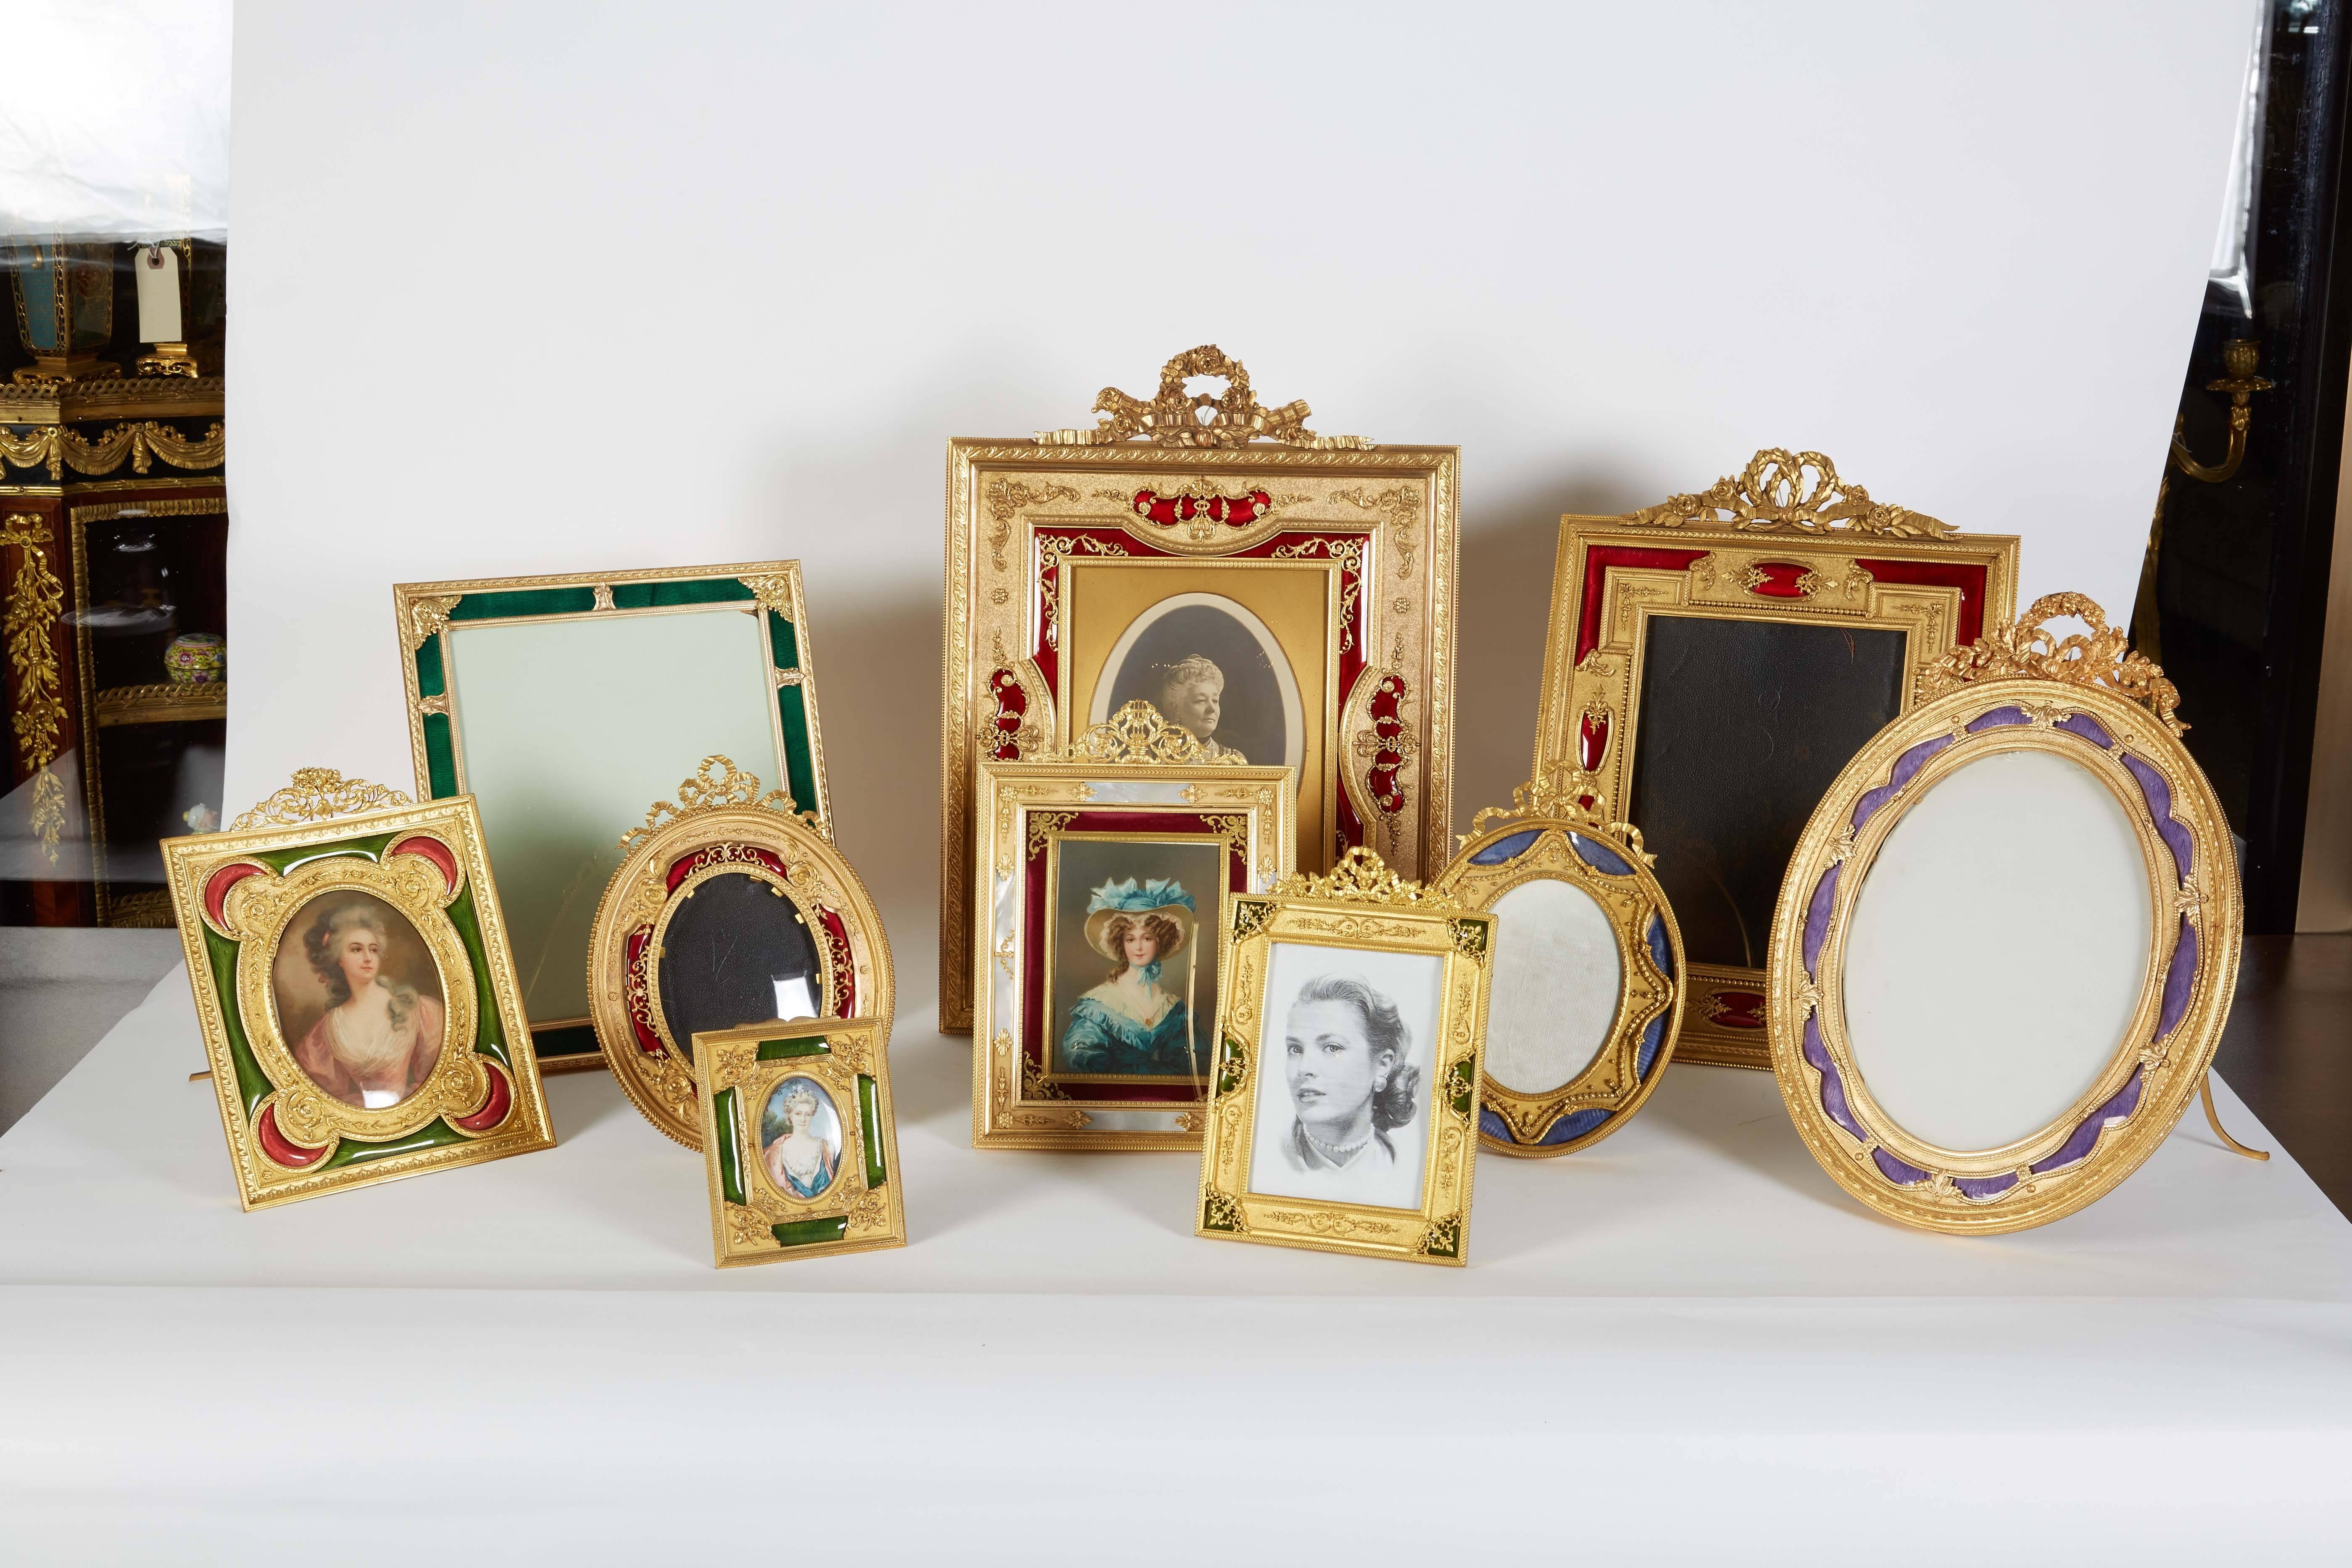 A French gilt bronze ormolu pink and green Guilloche enamel picture photo frame, 19th century.

Frame size: 10 x 7.5 inches.
Photo size: 5 x 4 inches.